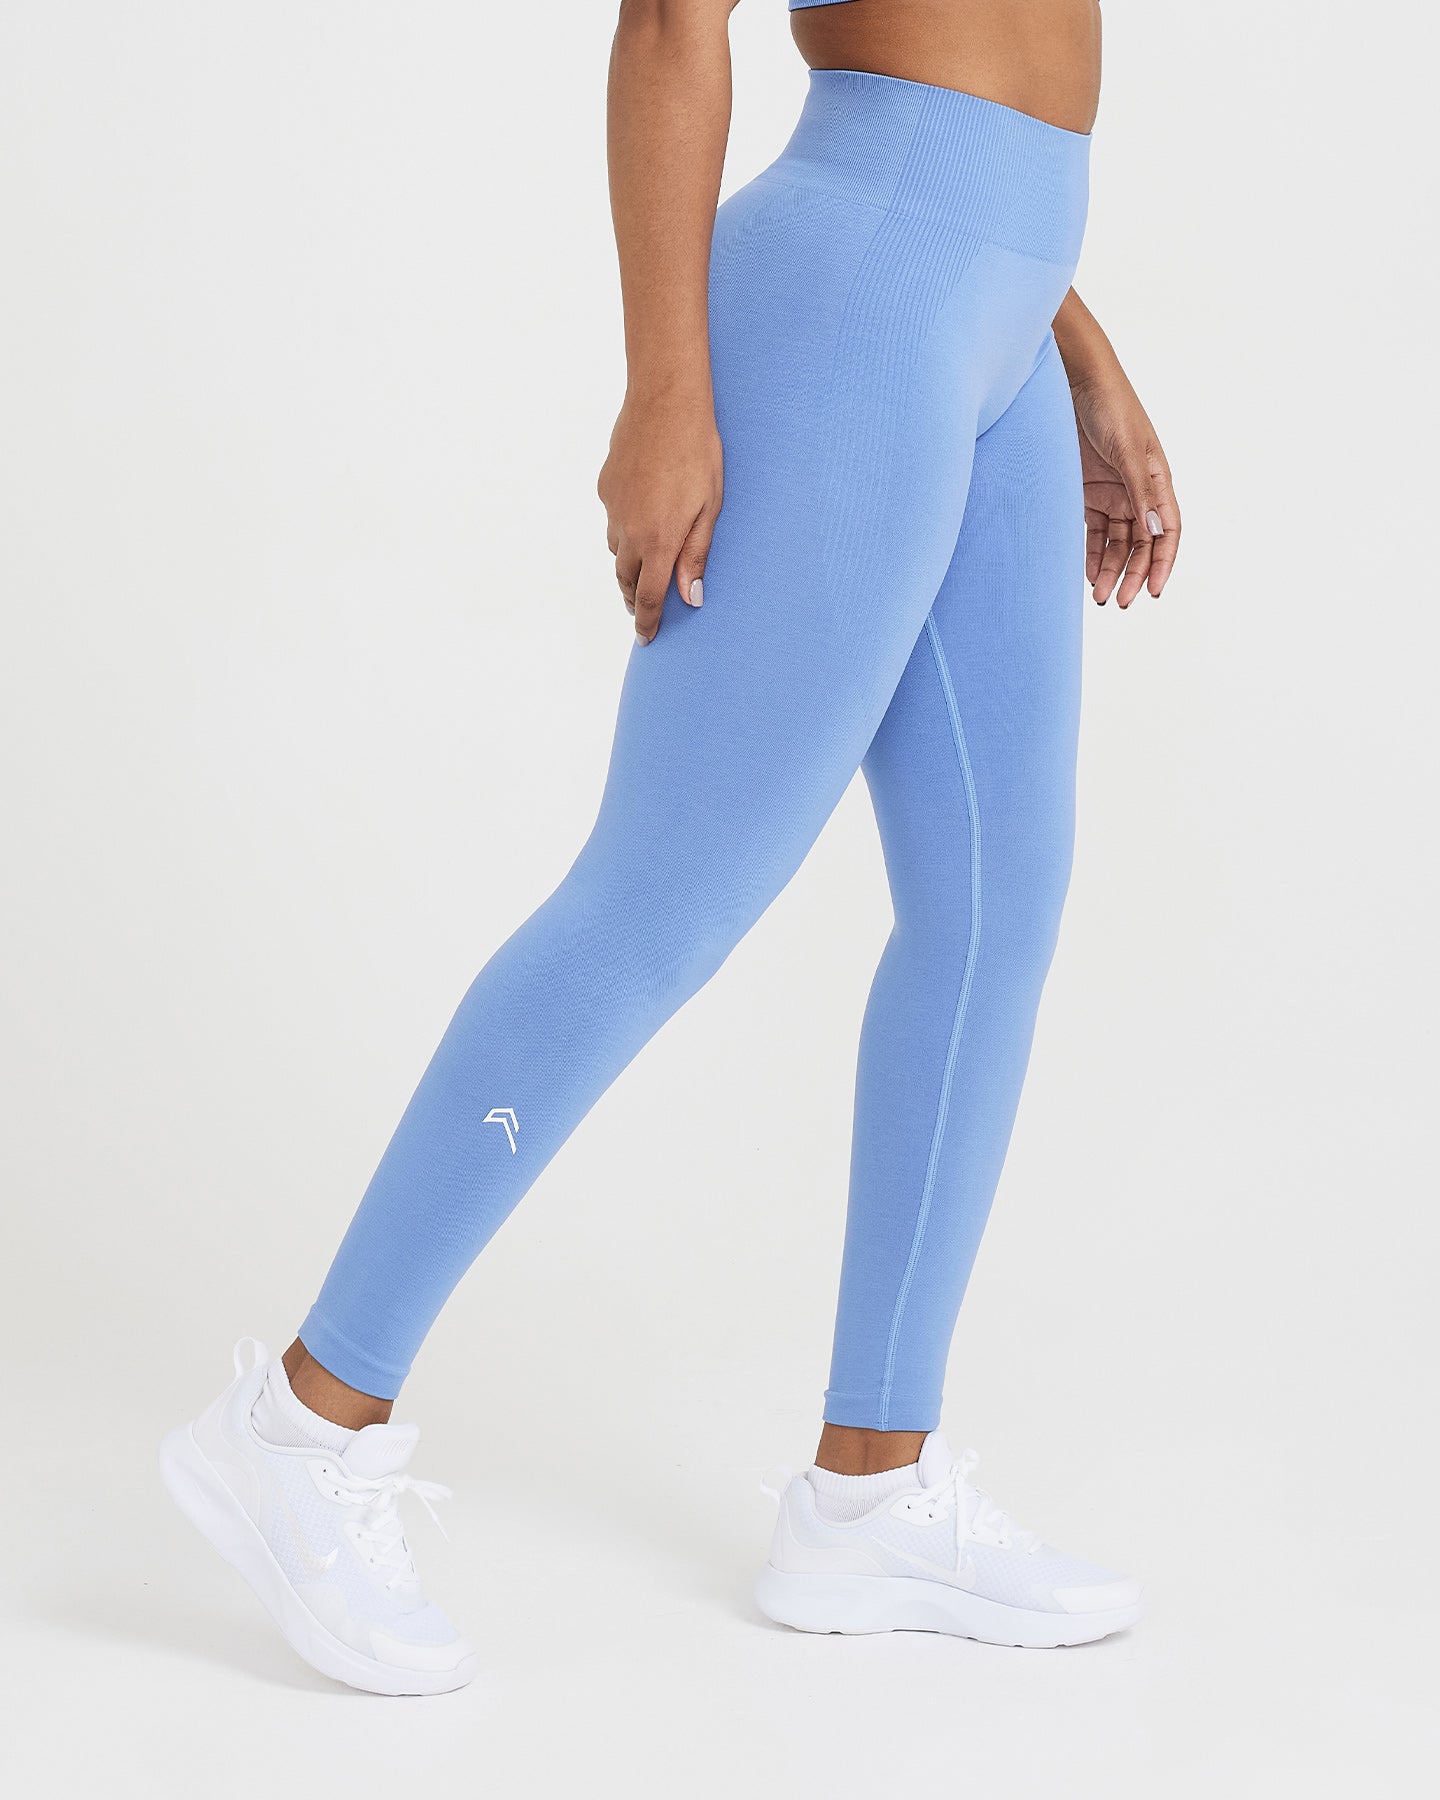 Find cheap Promotions Prenatal Yoga Leggings - Navy Blue in vogue at  volleyballcommodity.com